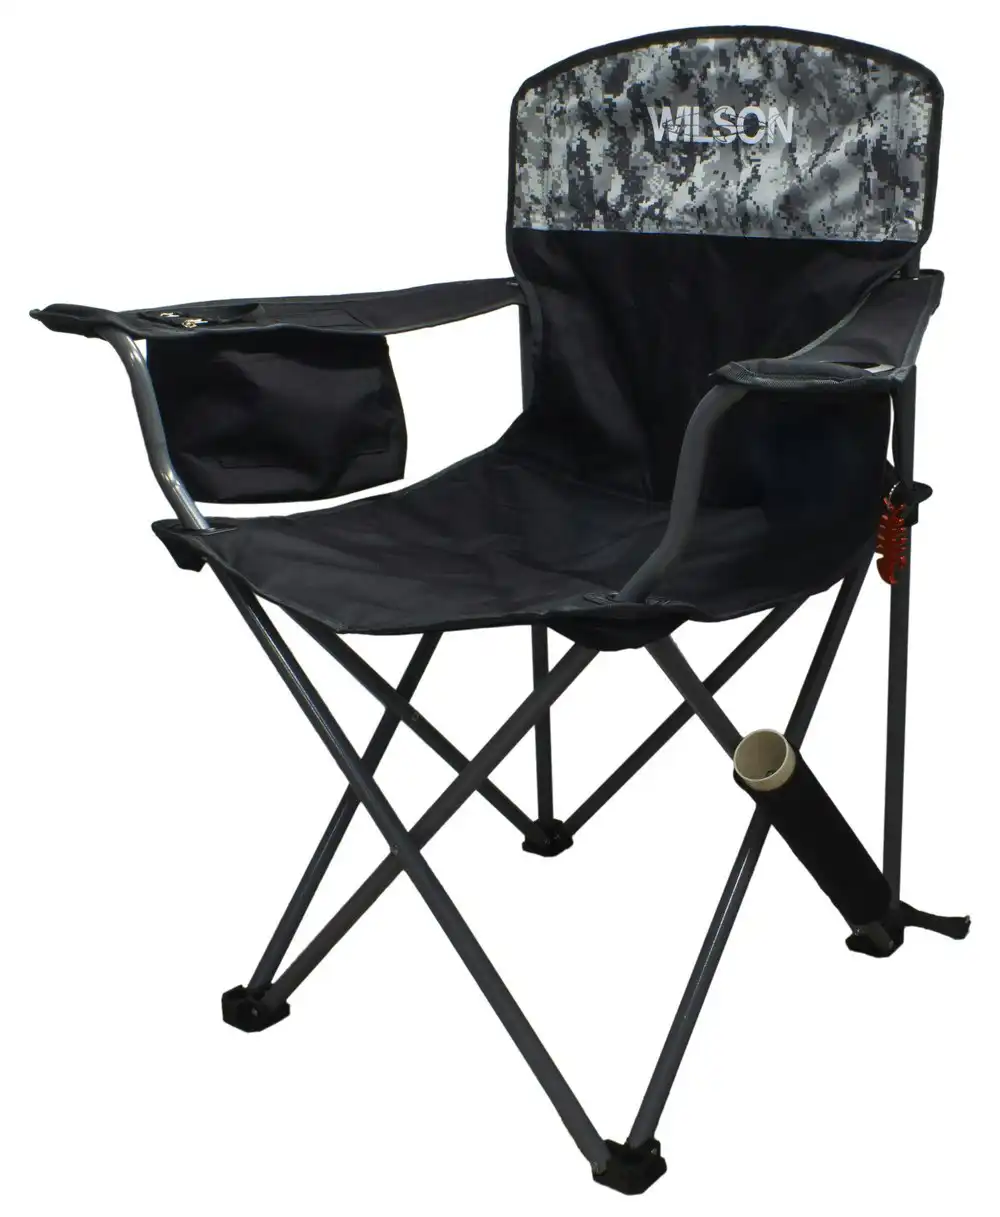 Wilson Digi Camo Camping/Fishing Chair with Lined Cooler Bag and